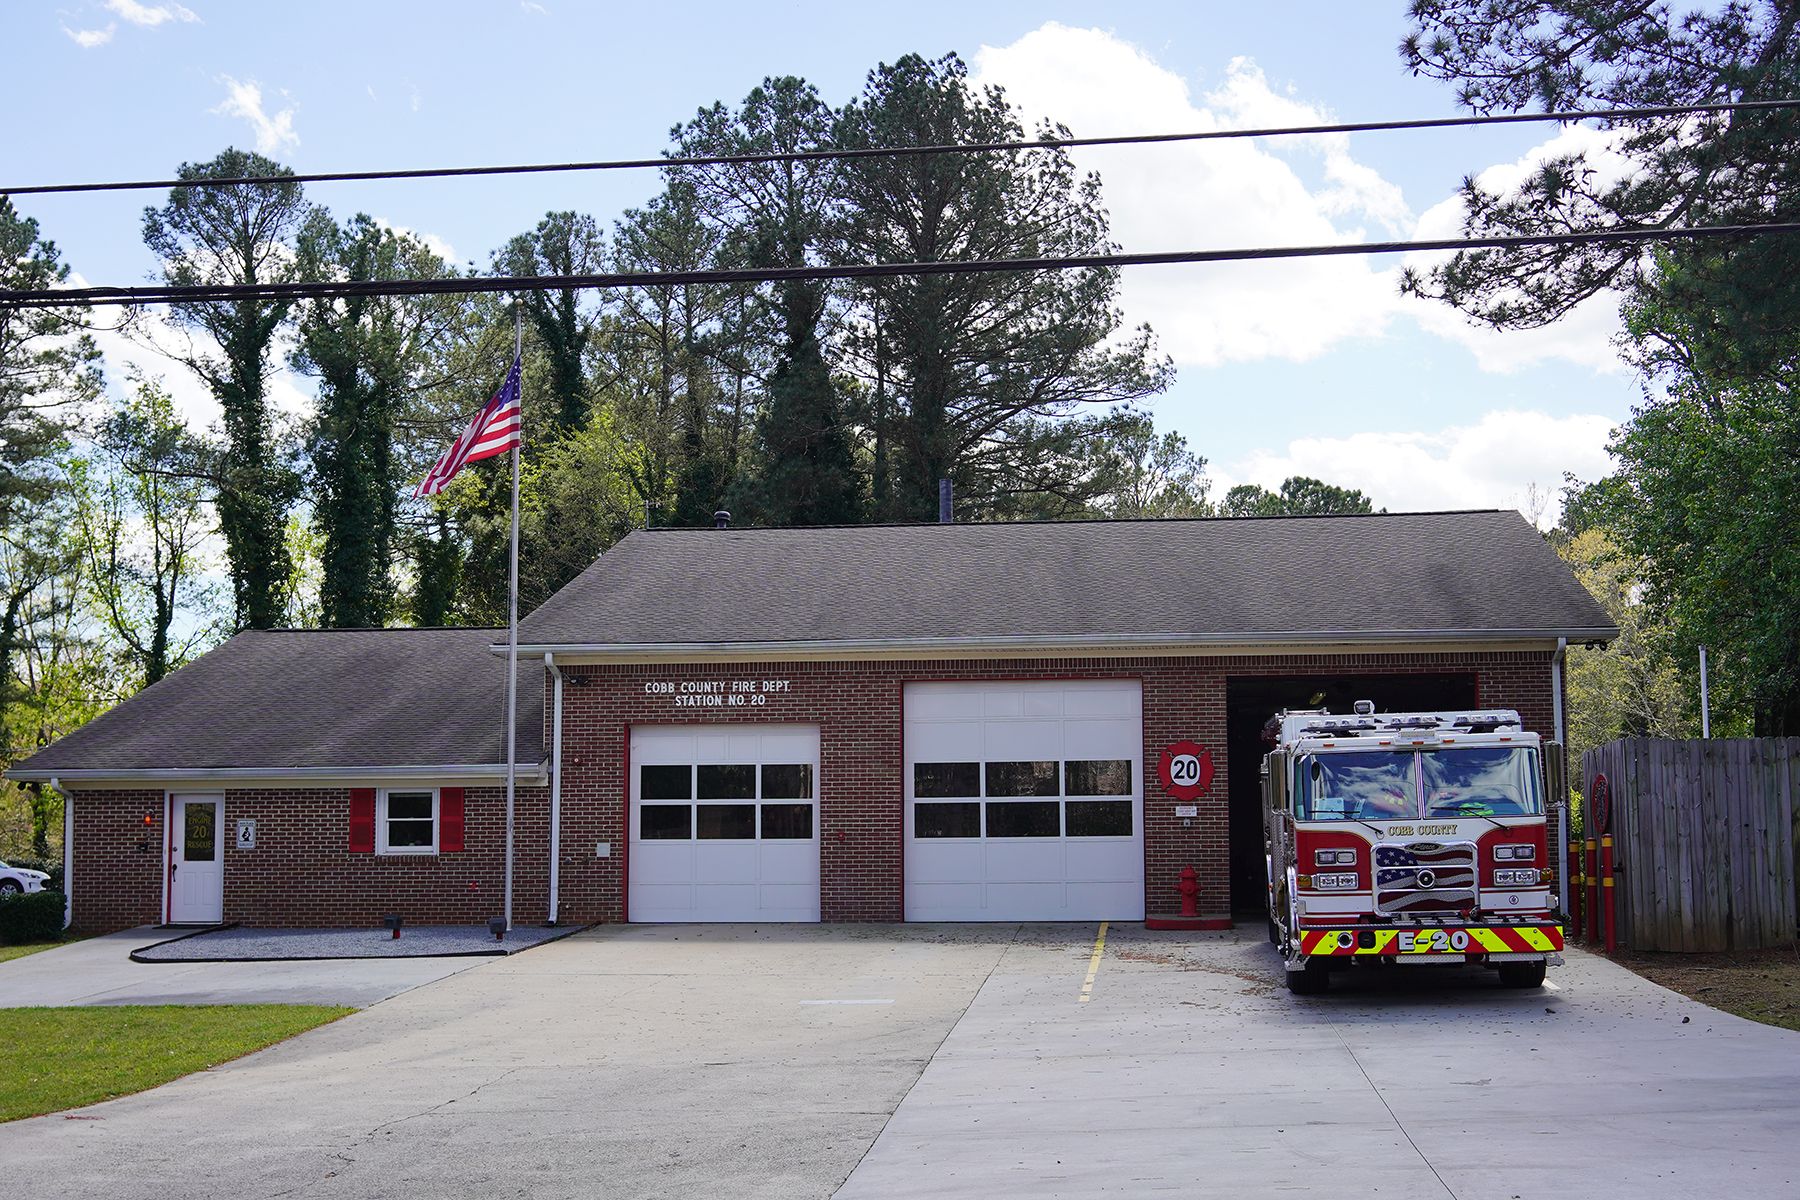 Outside of Fire Station 20